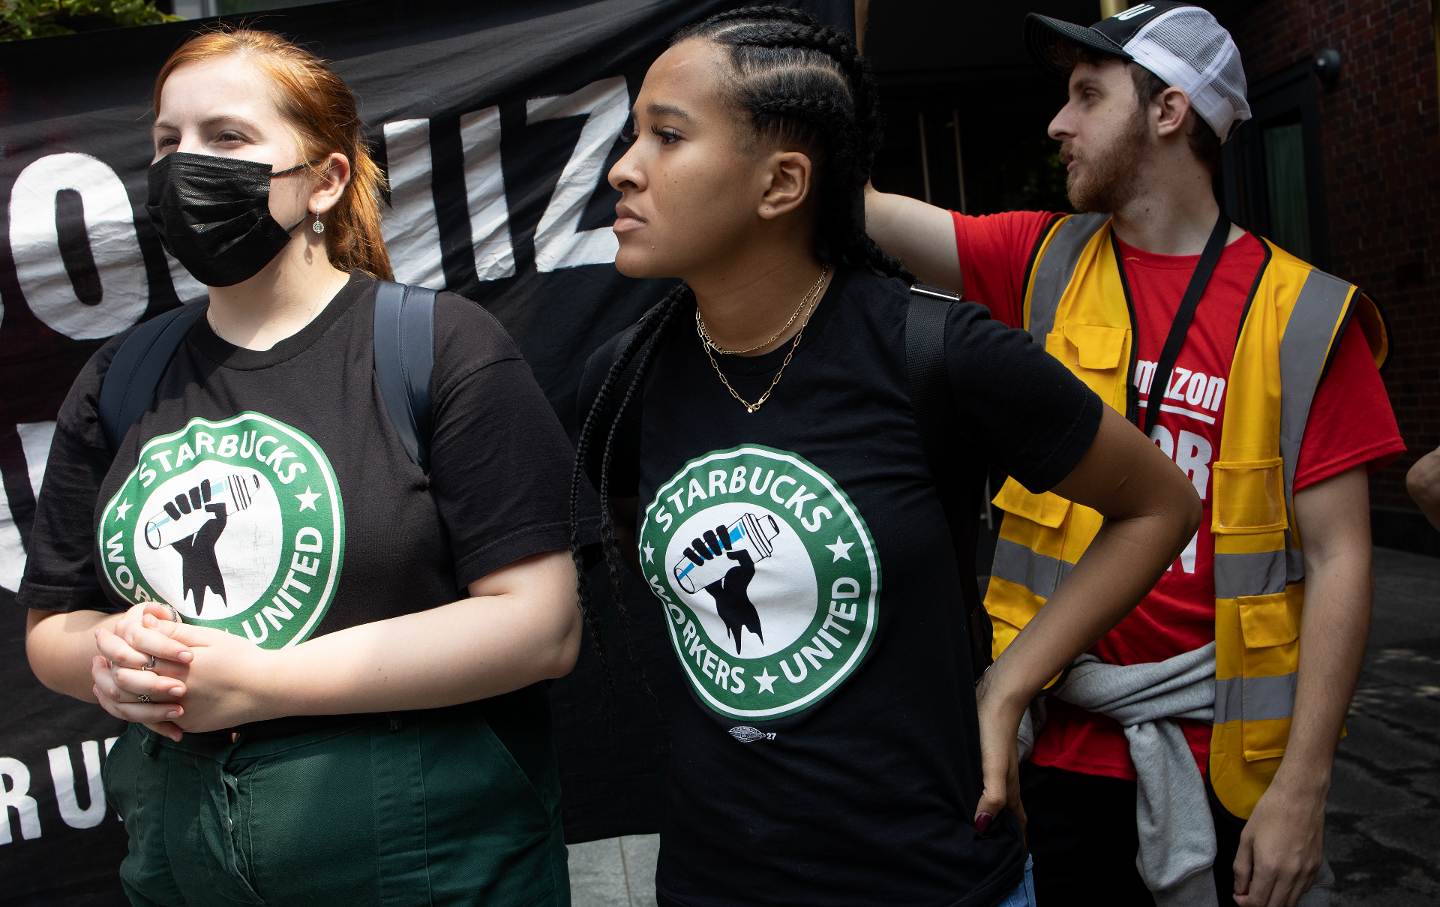 Starbucks workers hold a banner